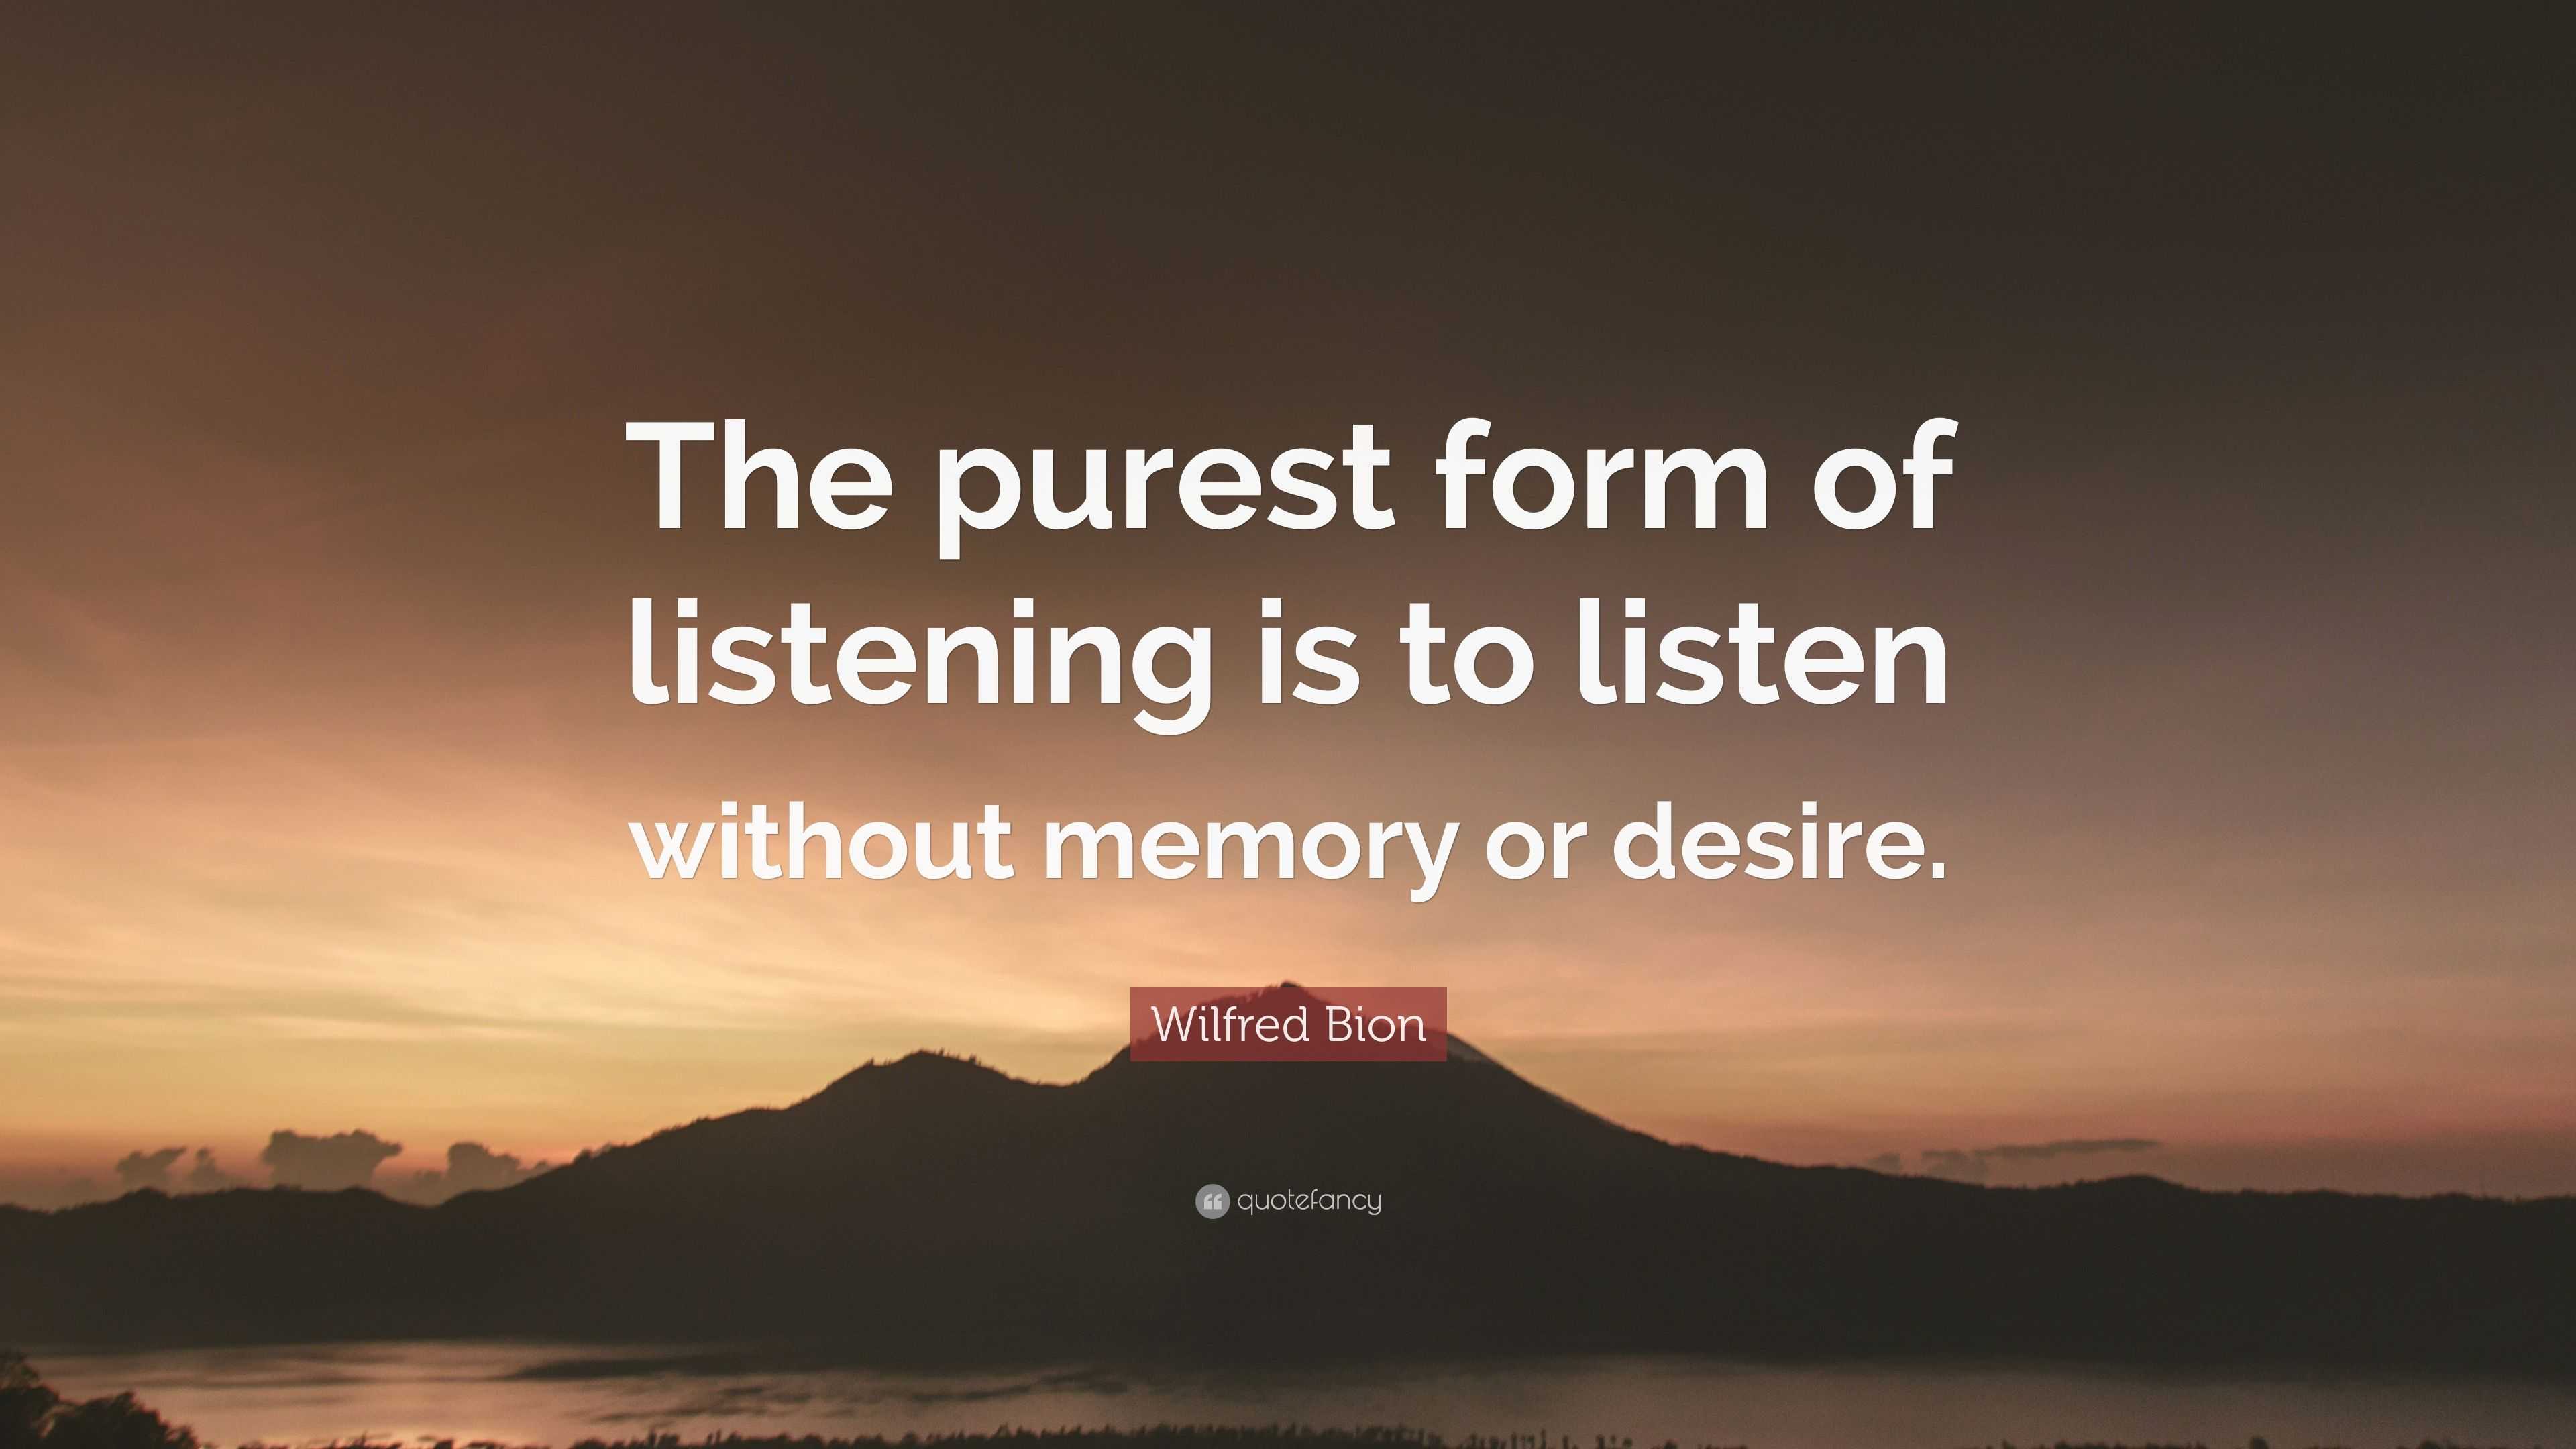 Wilfred Bion Quote: “The purest form of listening is to listen without ...